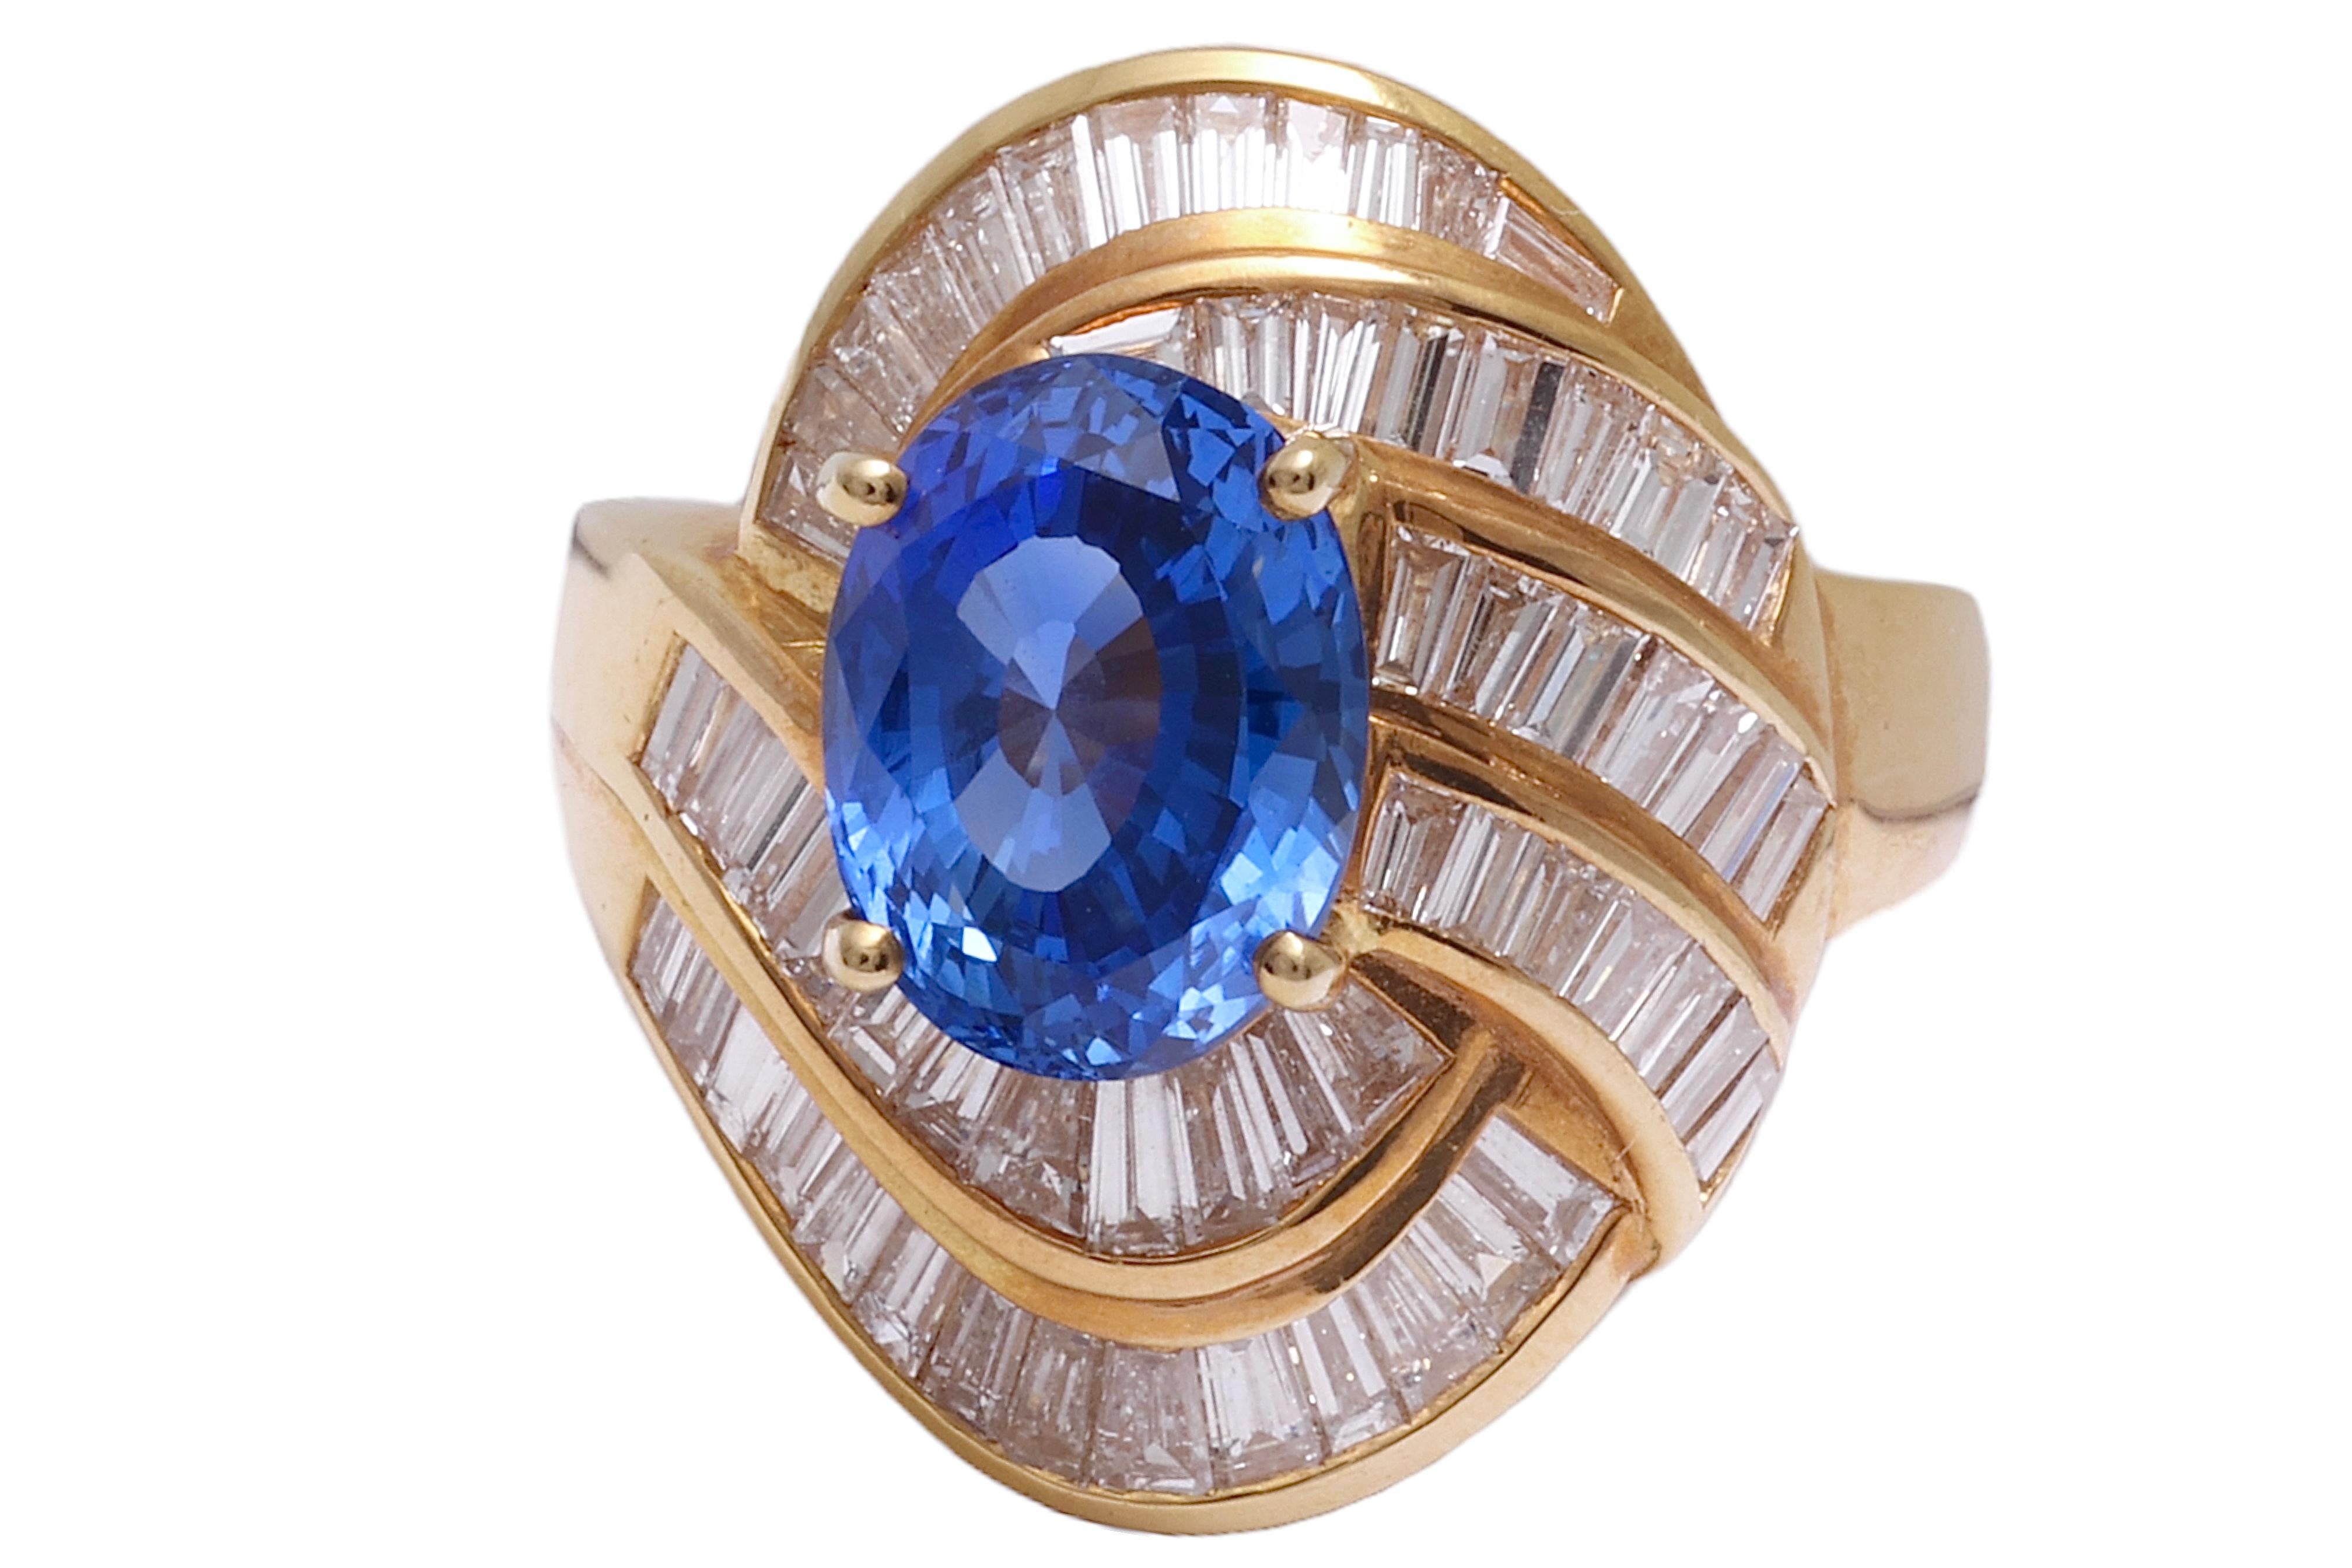  18 kt. Gold Ring With Ceylon Sapphire & Baguette Cut Diamonds For Sale 1